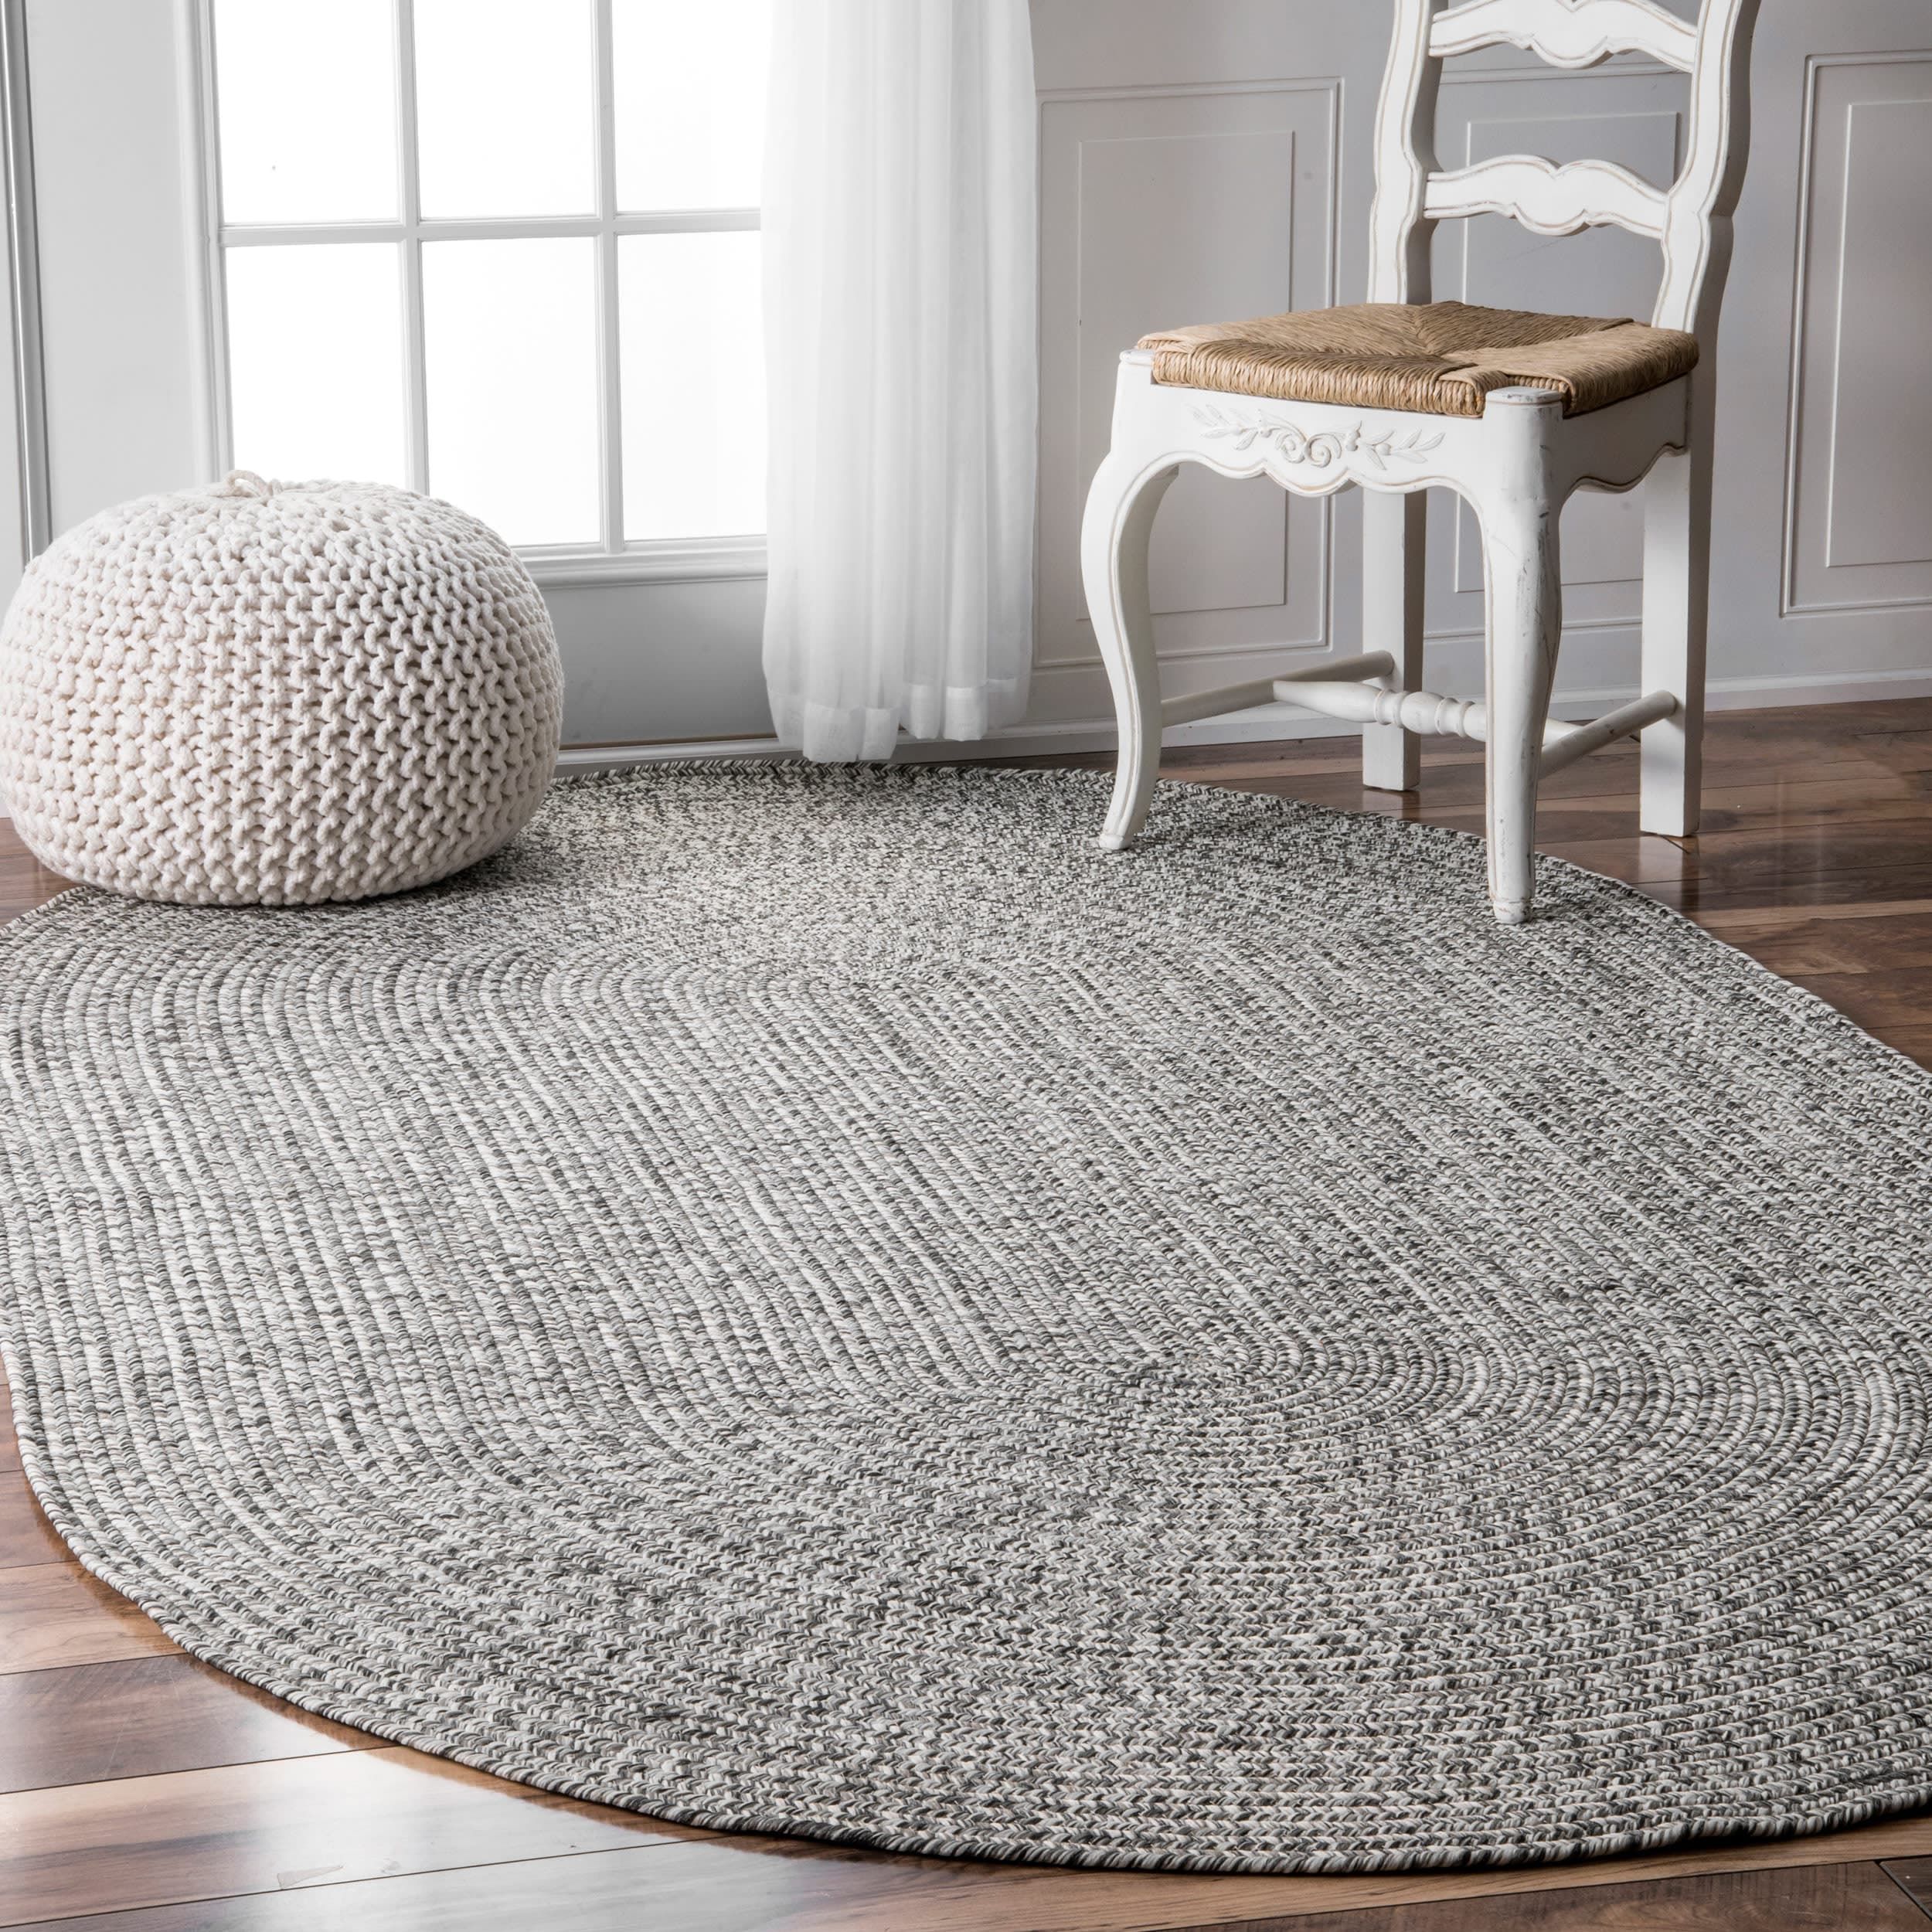 Nuloom 9 X 12 Salt And Pepper Oval Indoor/outdoor Solid Coastal Area Rug In  The Rugs Department At Lowes In Oval Rugs (View 4 of 15)